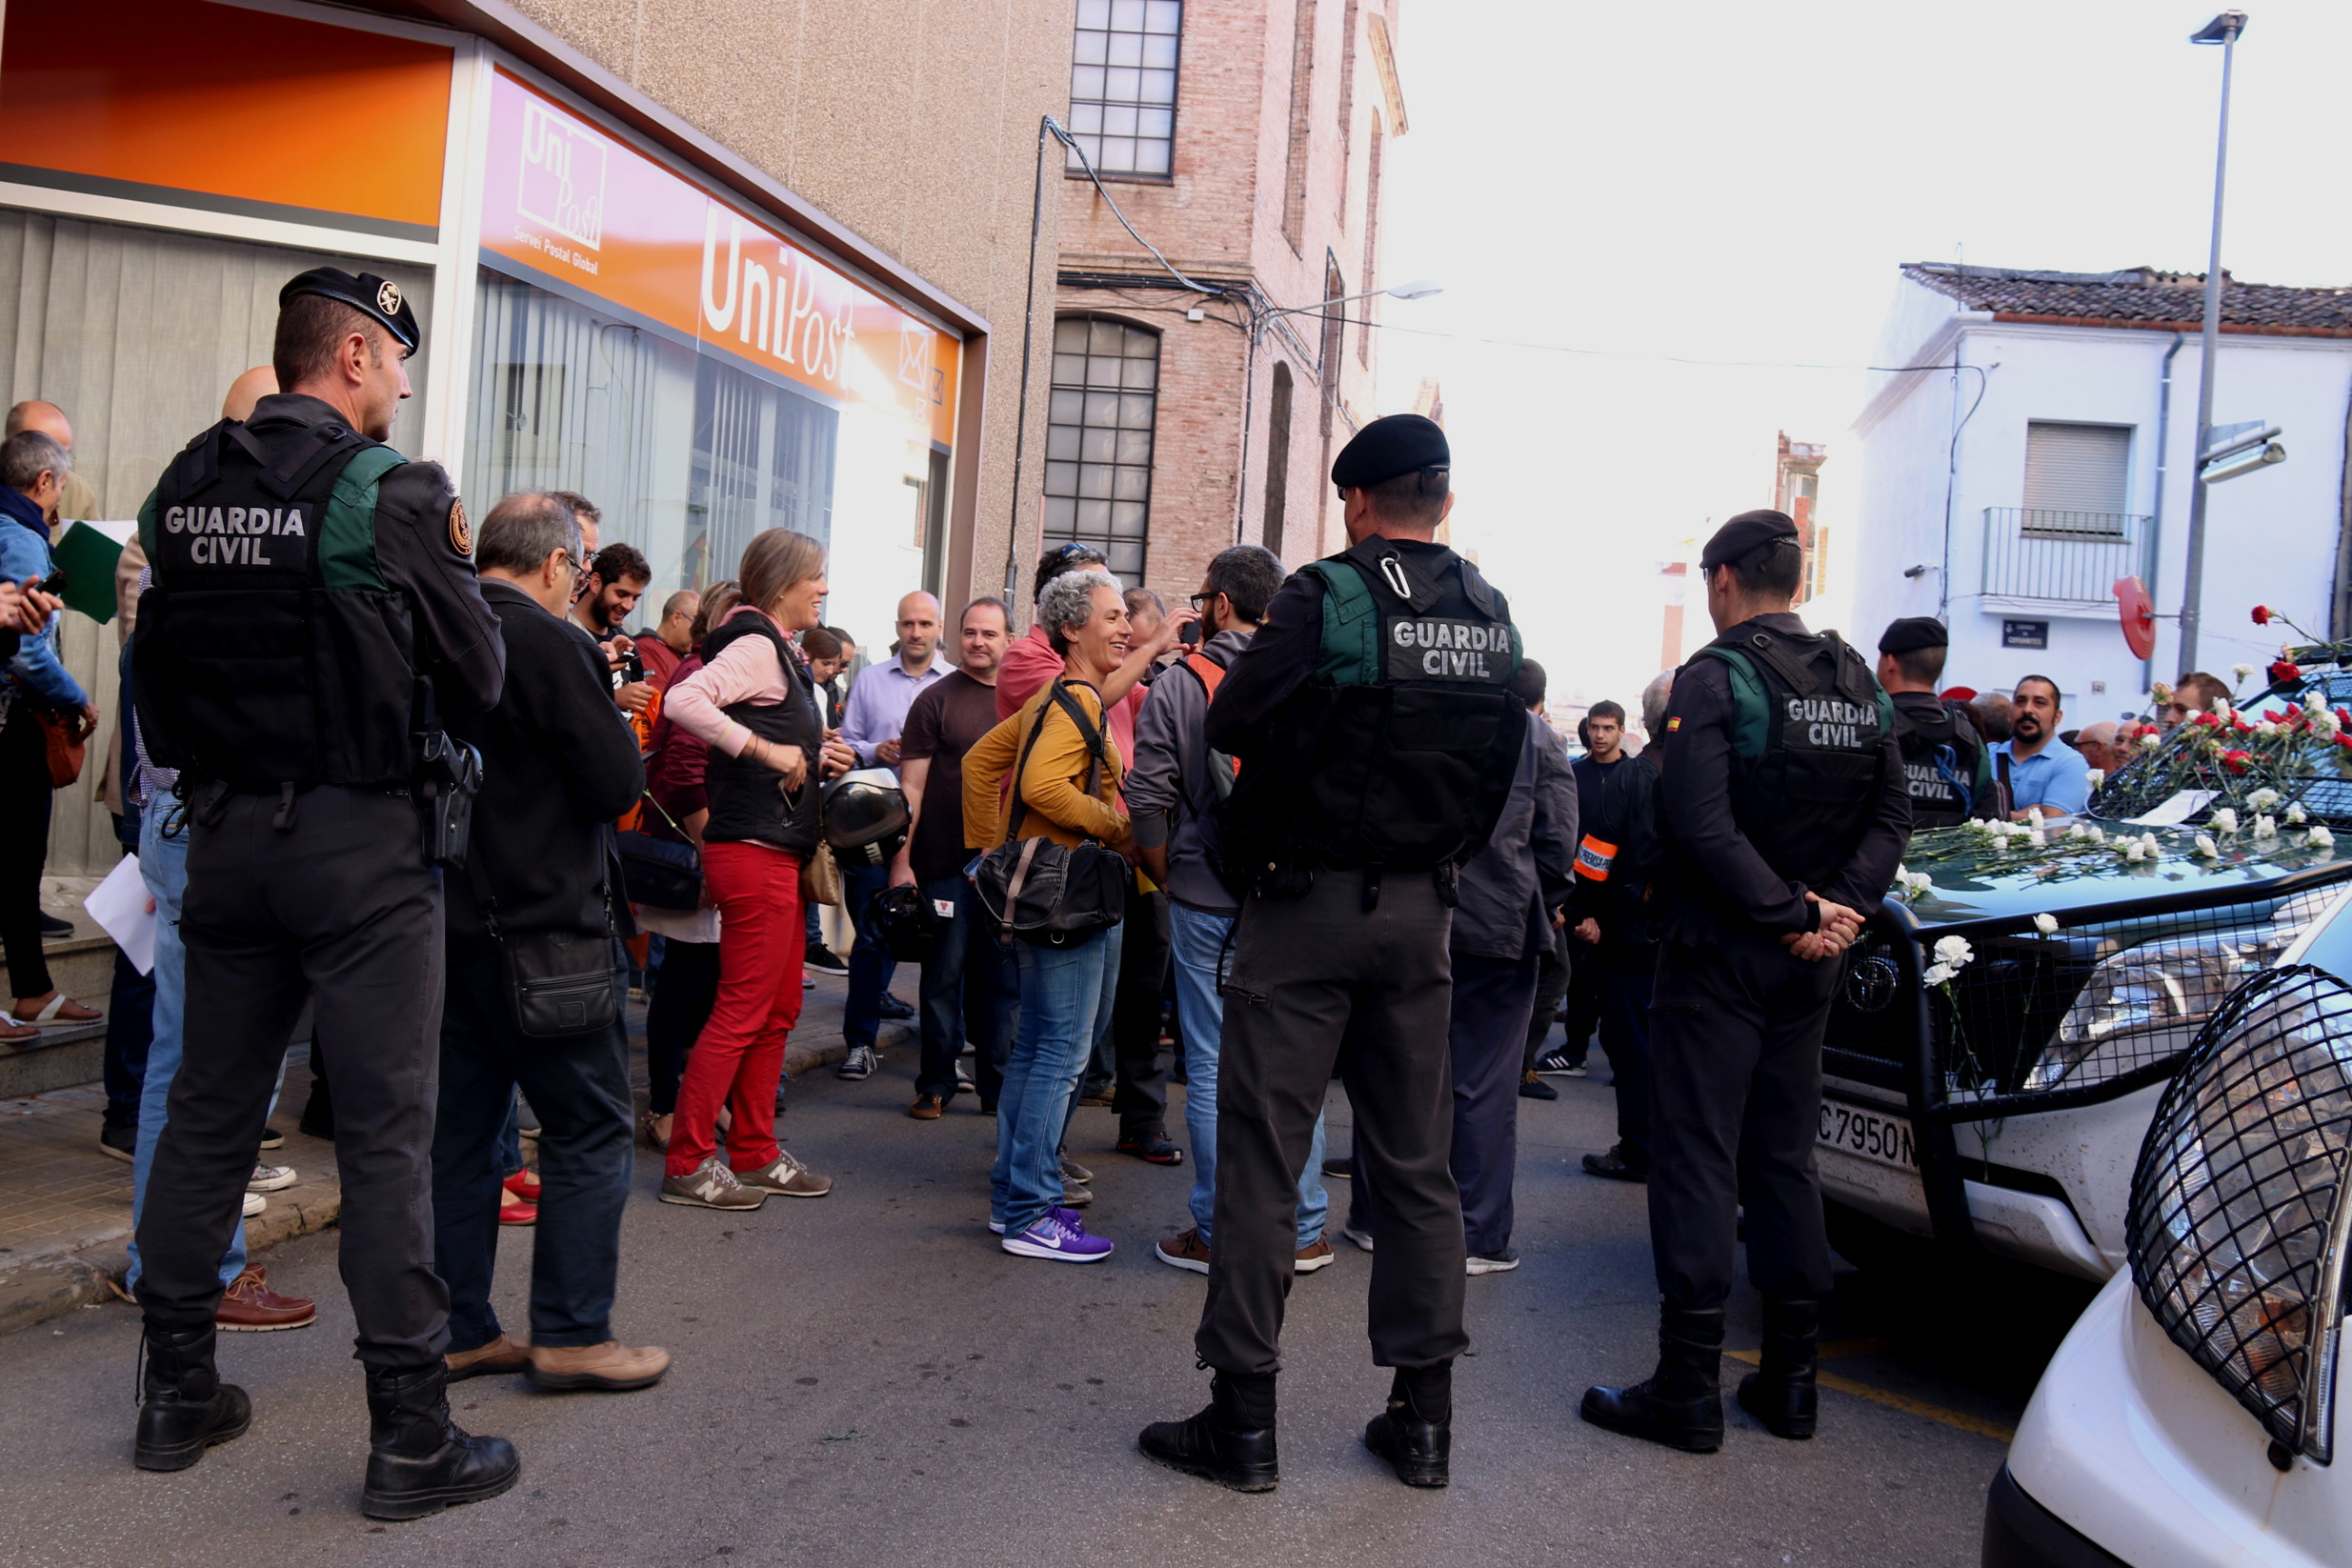 Guardia Civil officers guard delivery company Unipost office while raiding it; citizens protest